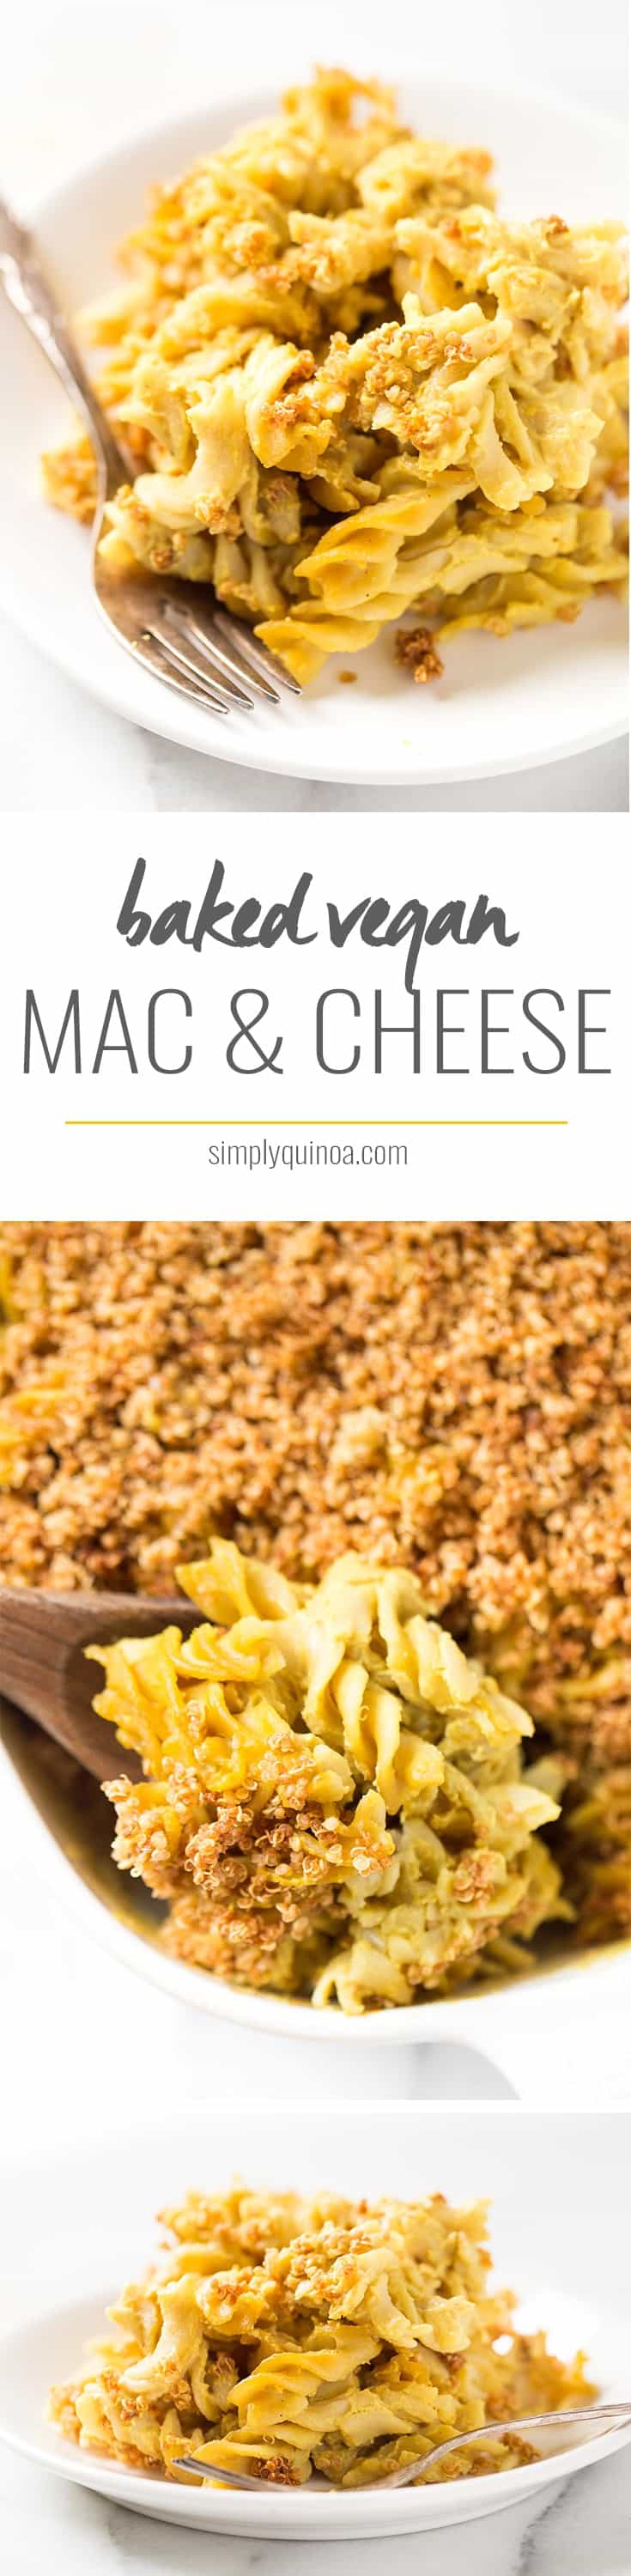 Baked VEGAN Mac and Cheese with a dreamy "cheese" sauce and a crunchy quinoa topping!